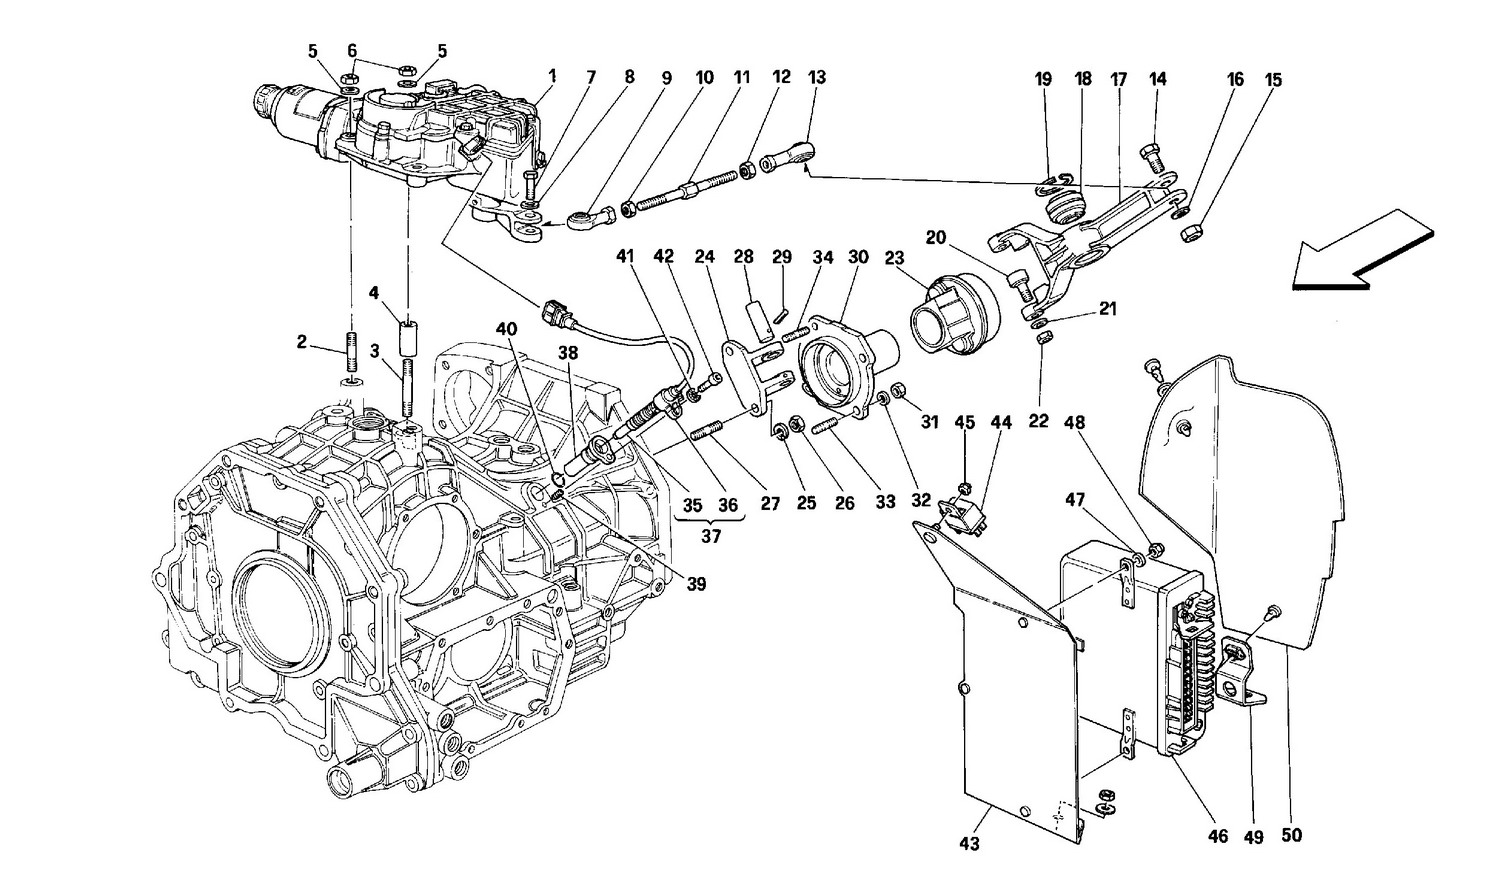 Schematic: Electronic Clutch - Controls